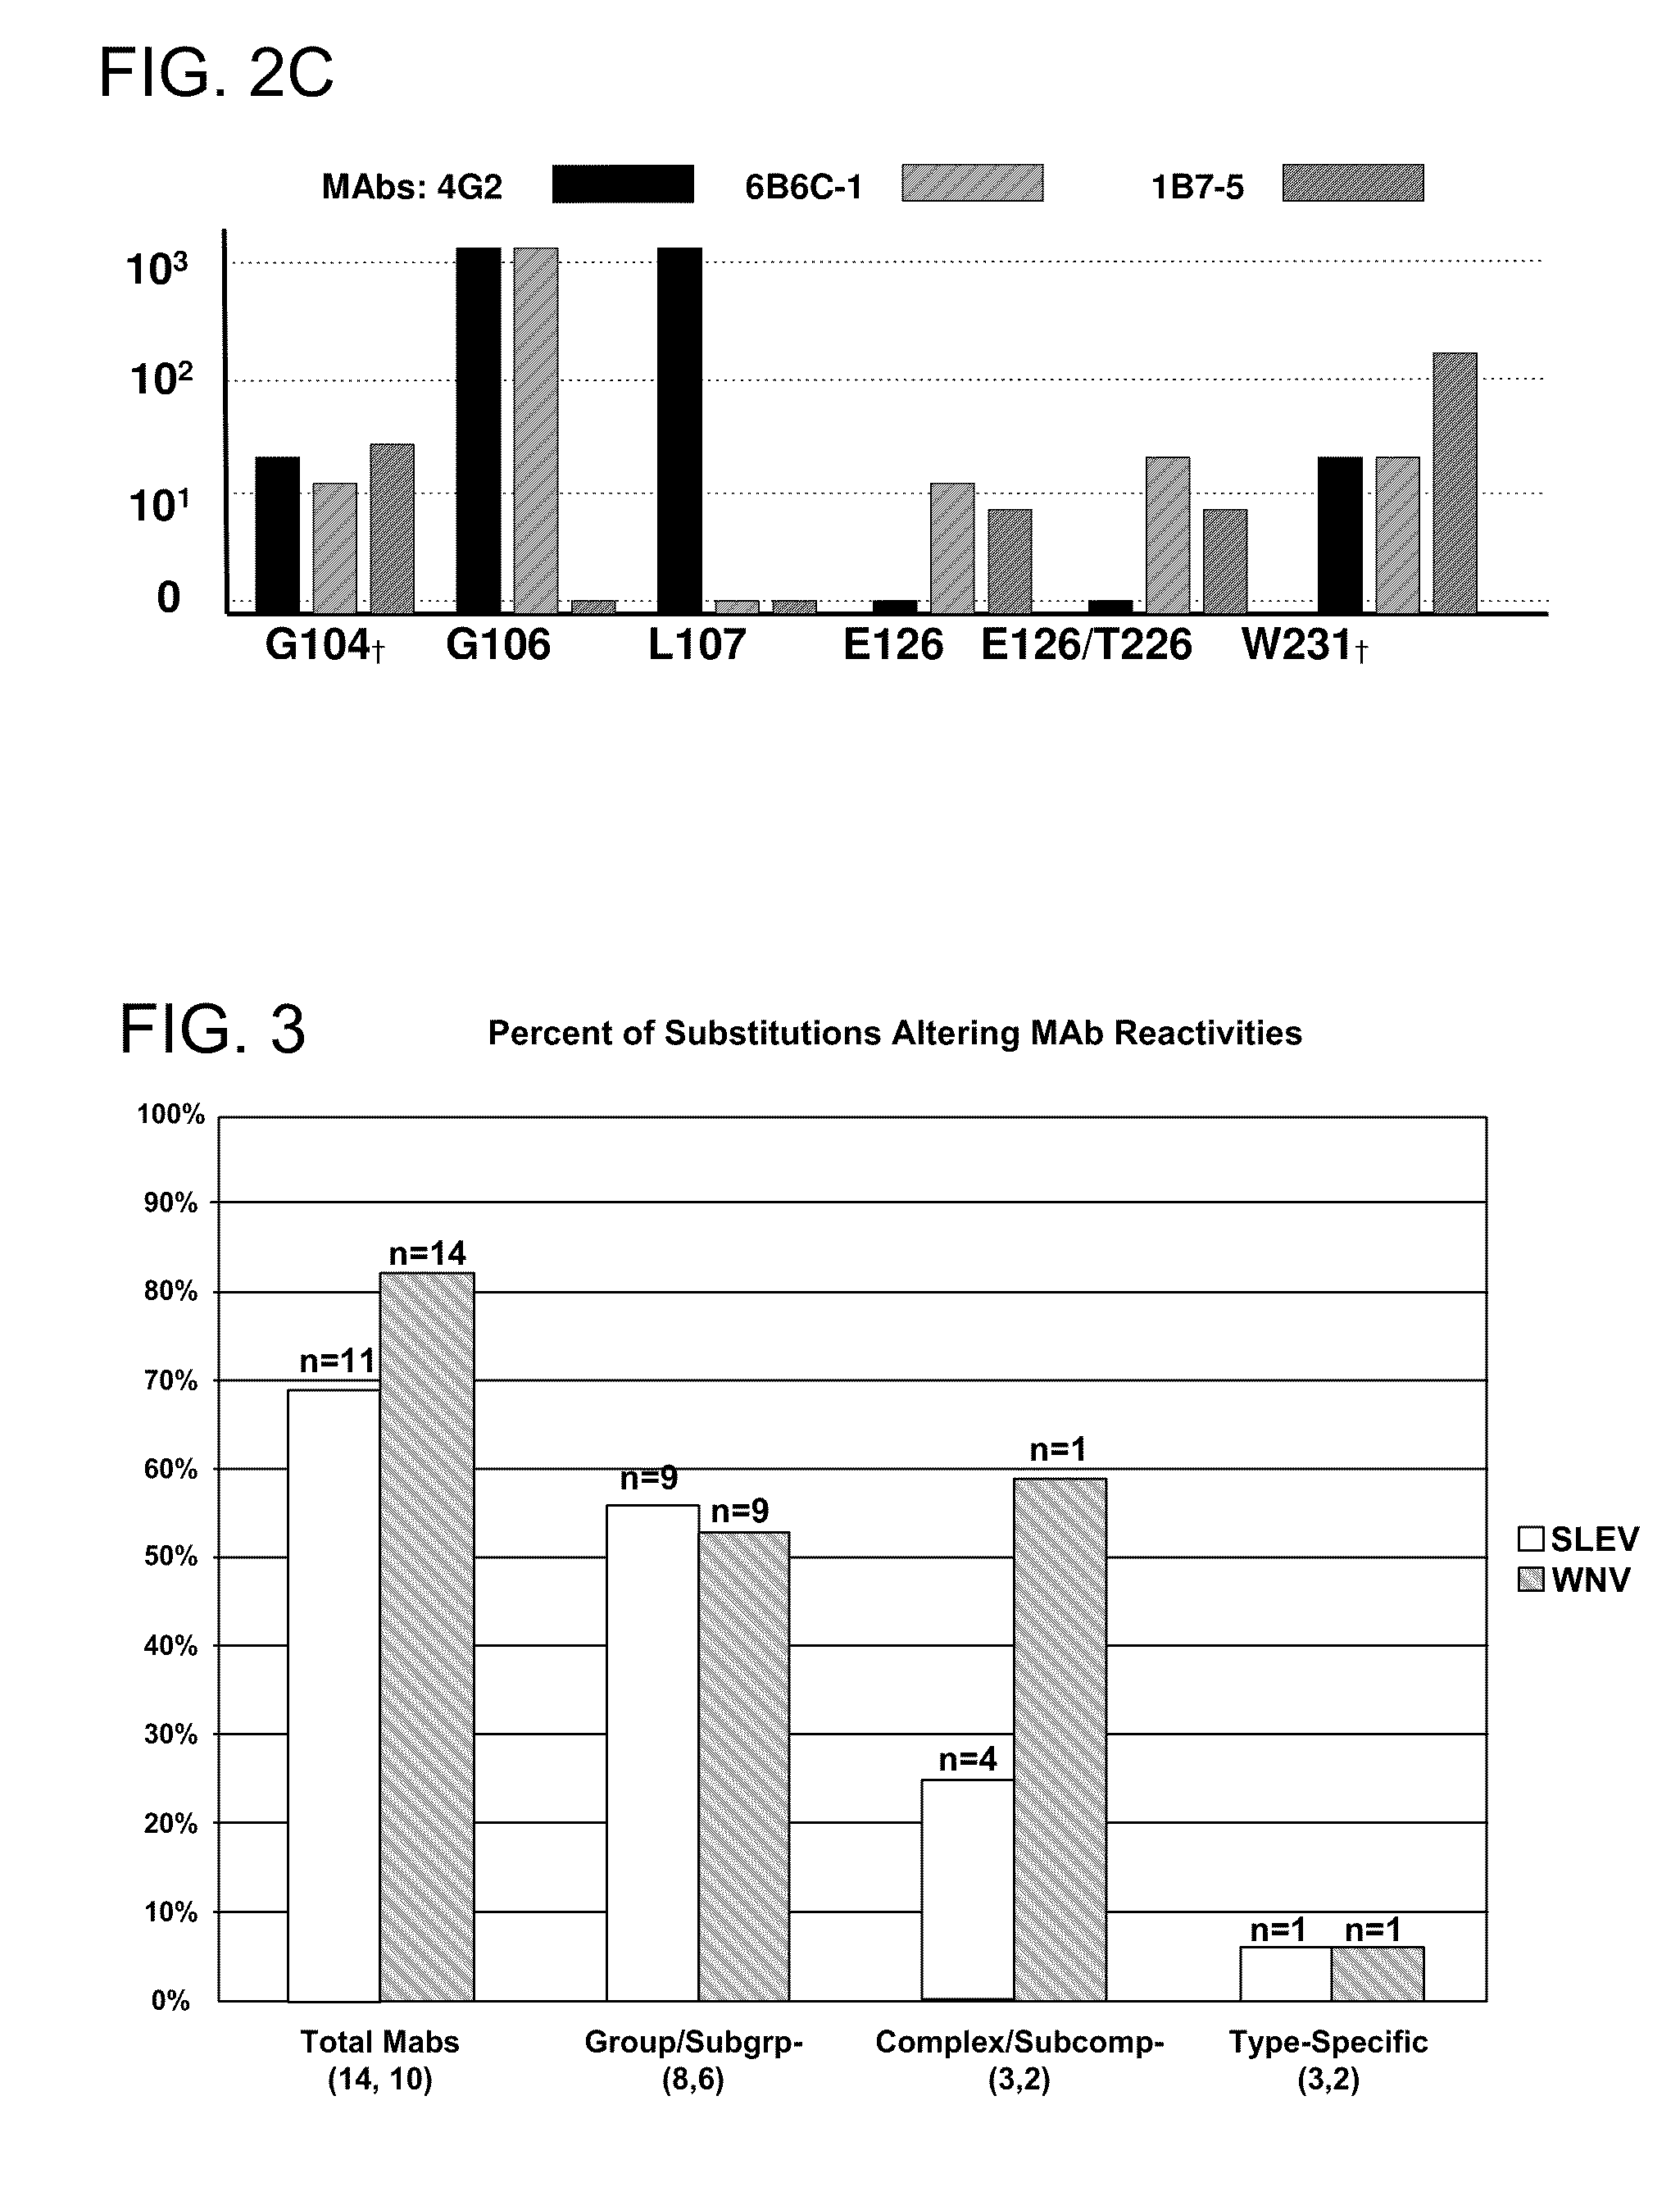 Localization and characterization of flavivirus envelope glycoprotein cross-reactive epitopes and methods for their use